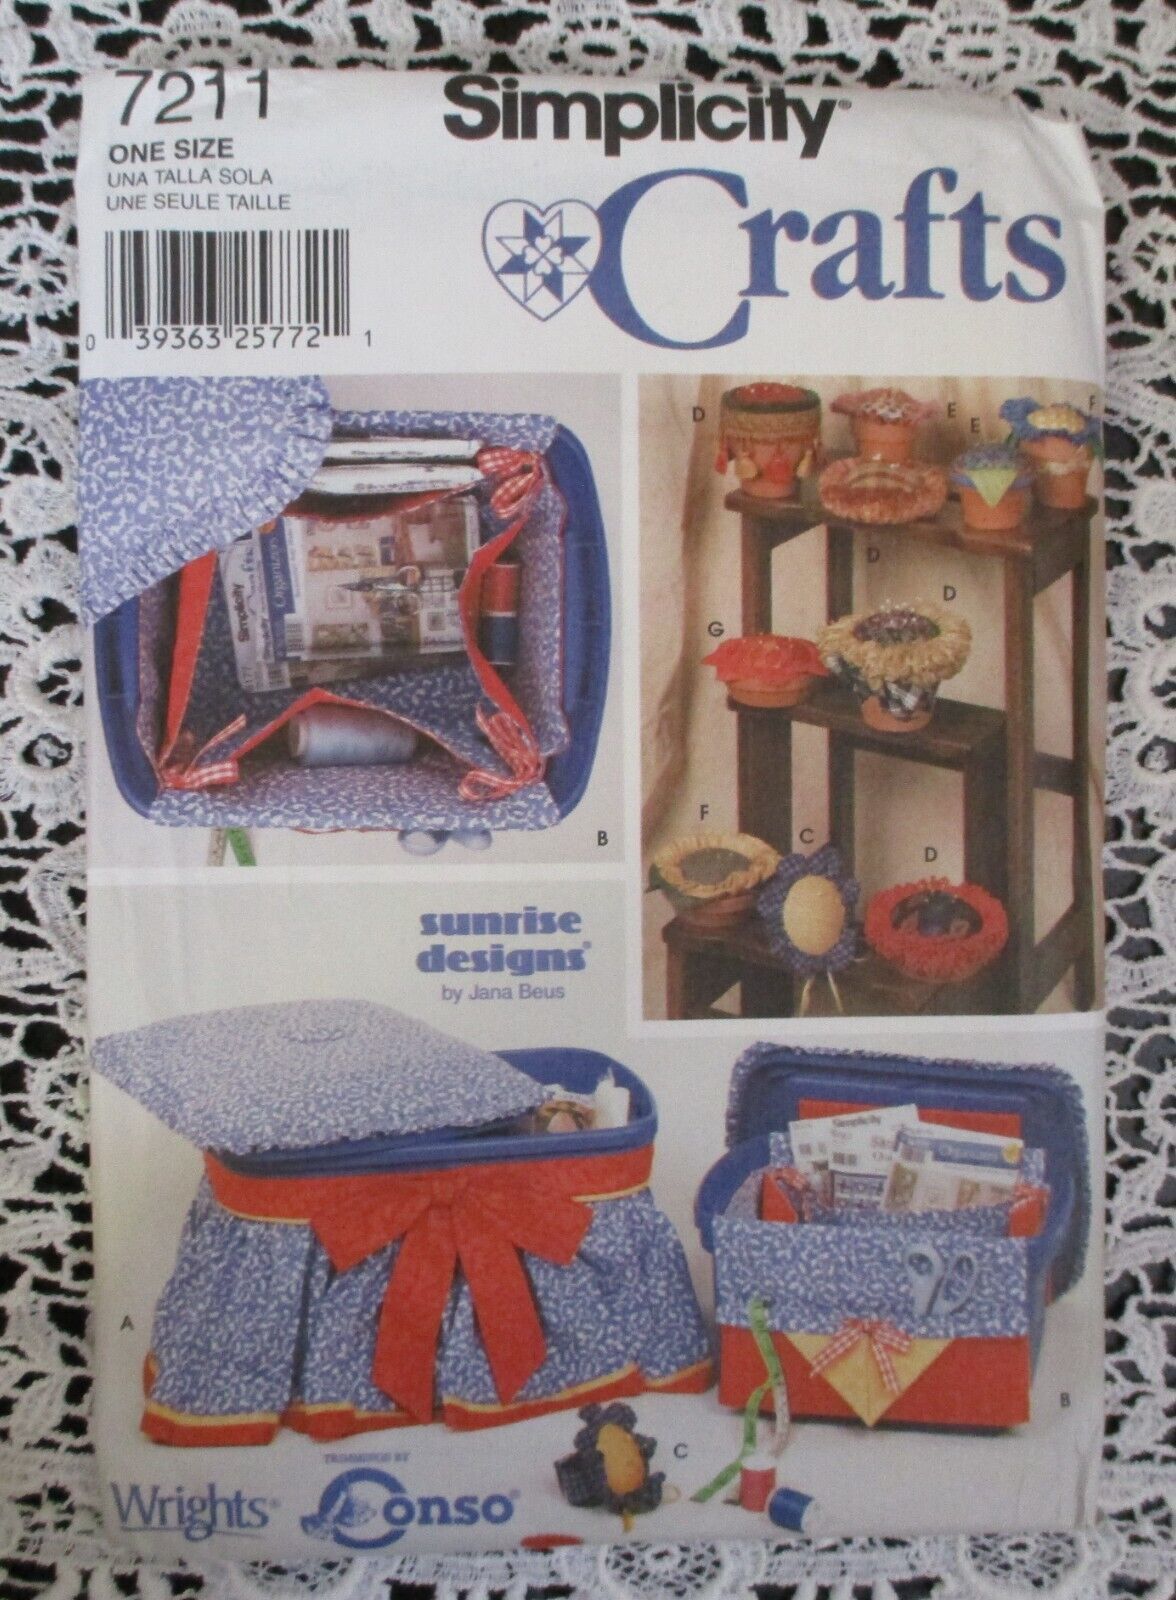 Simplicity Crafts 7211 Sewing Accessories Baskets & Pin Cushions NEW - $6.72